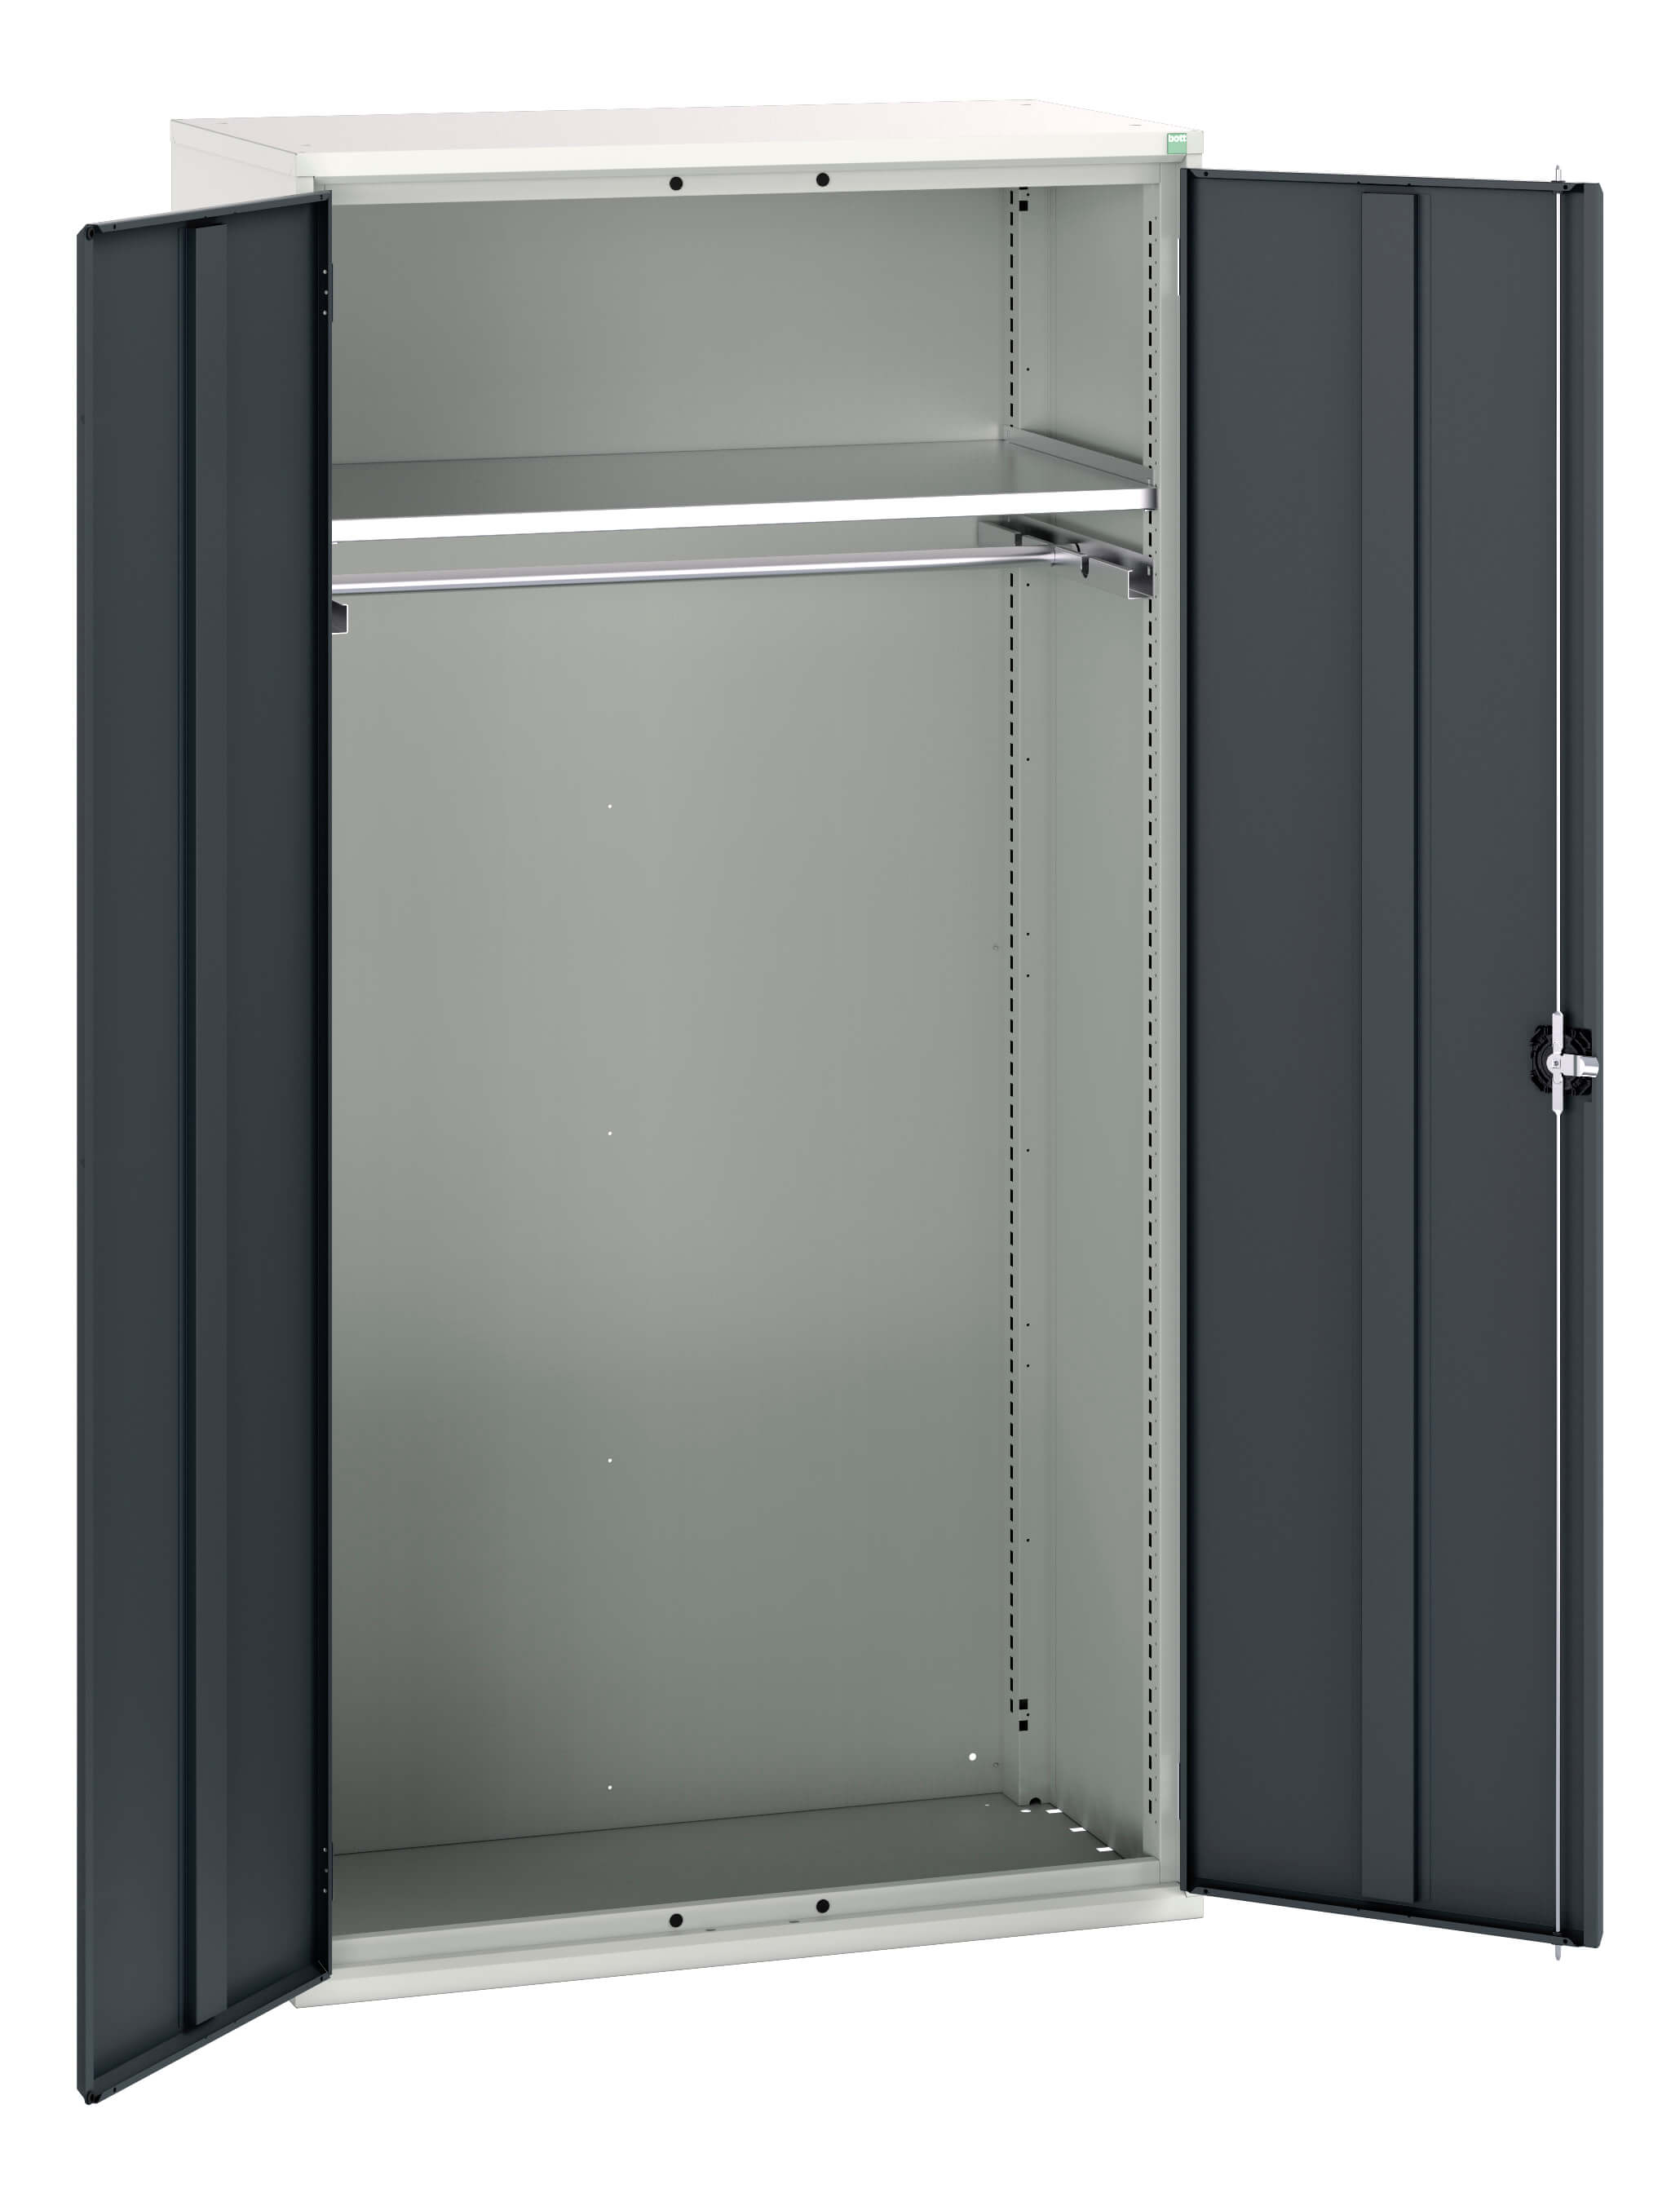 Bott Verso Ppe / Janitorial Kitted Cupboard - 16926584.19